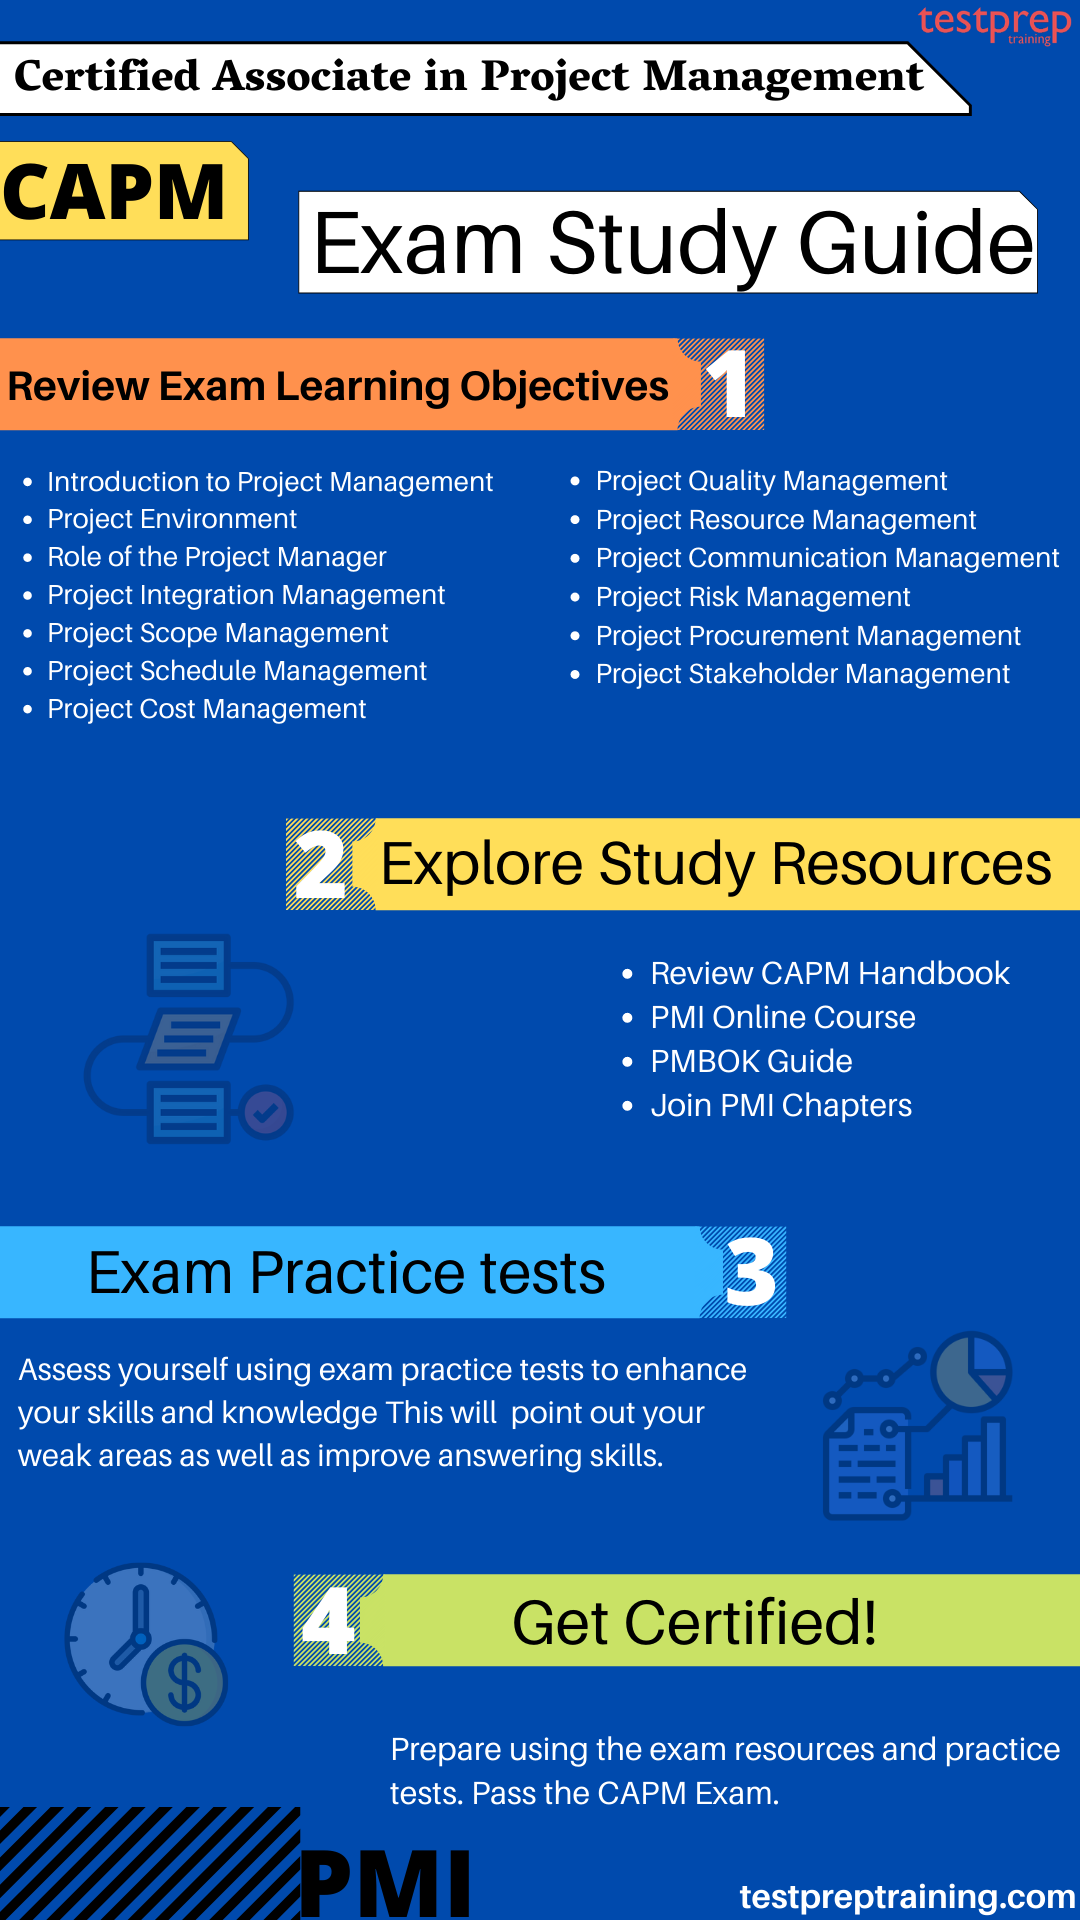 Certified Associate in Project Management (CAPM) guide